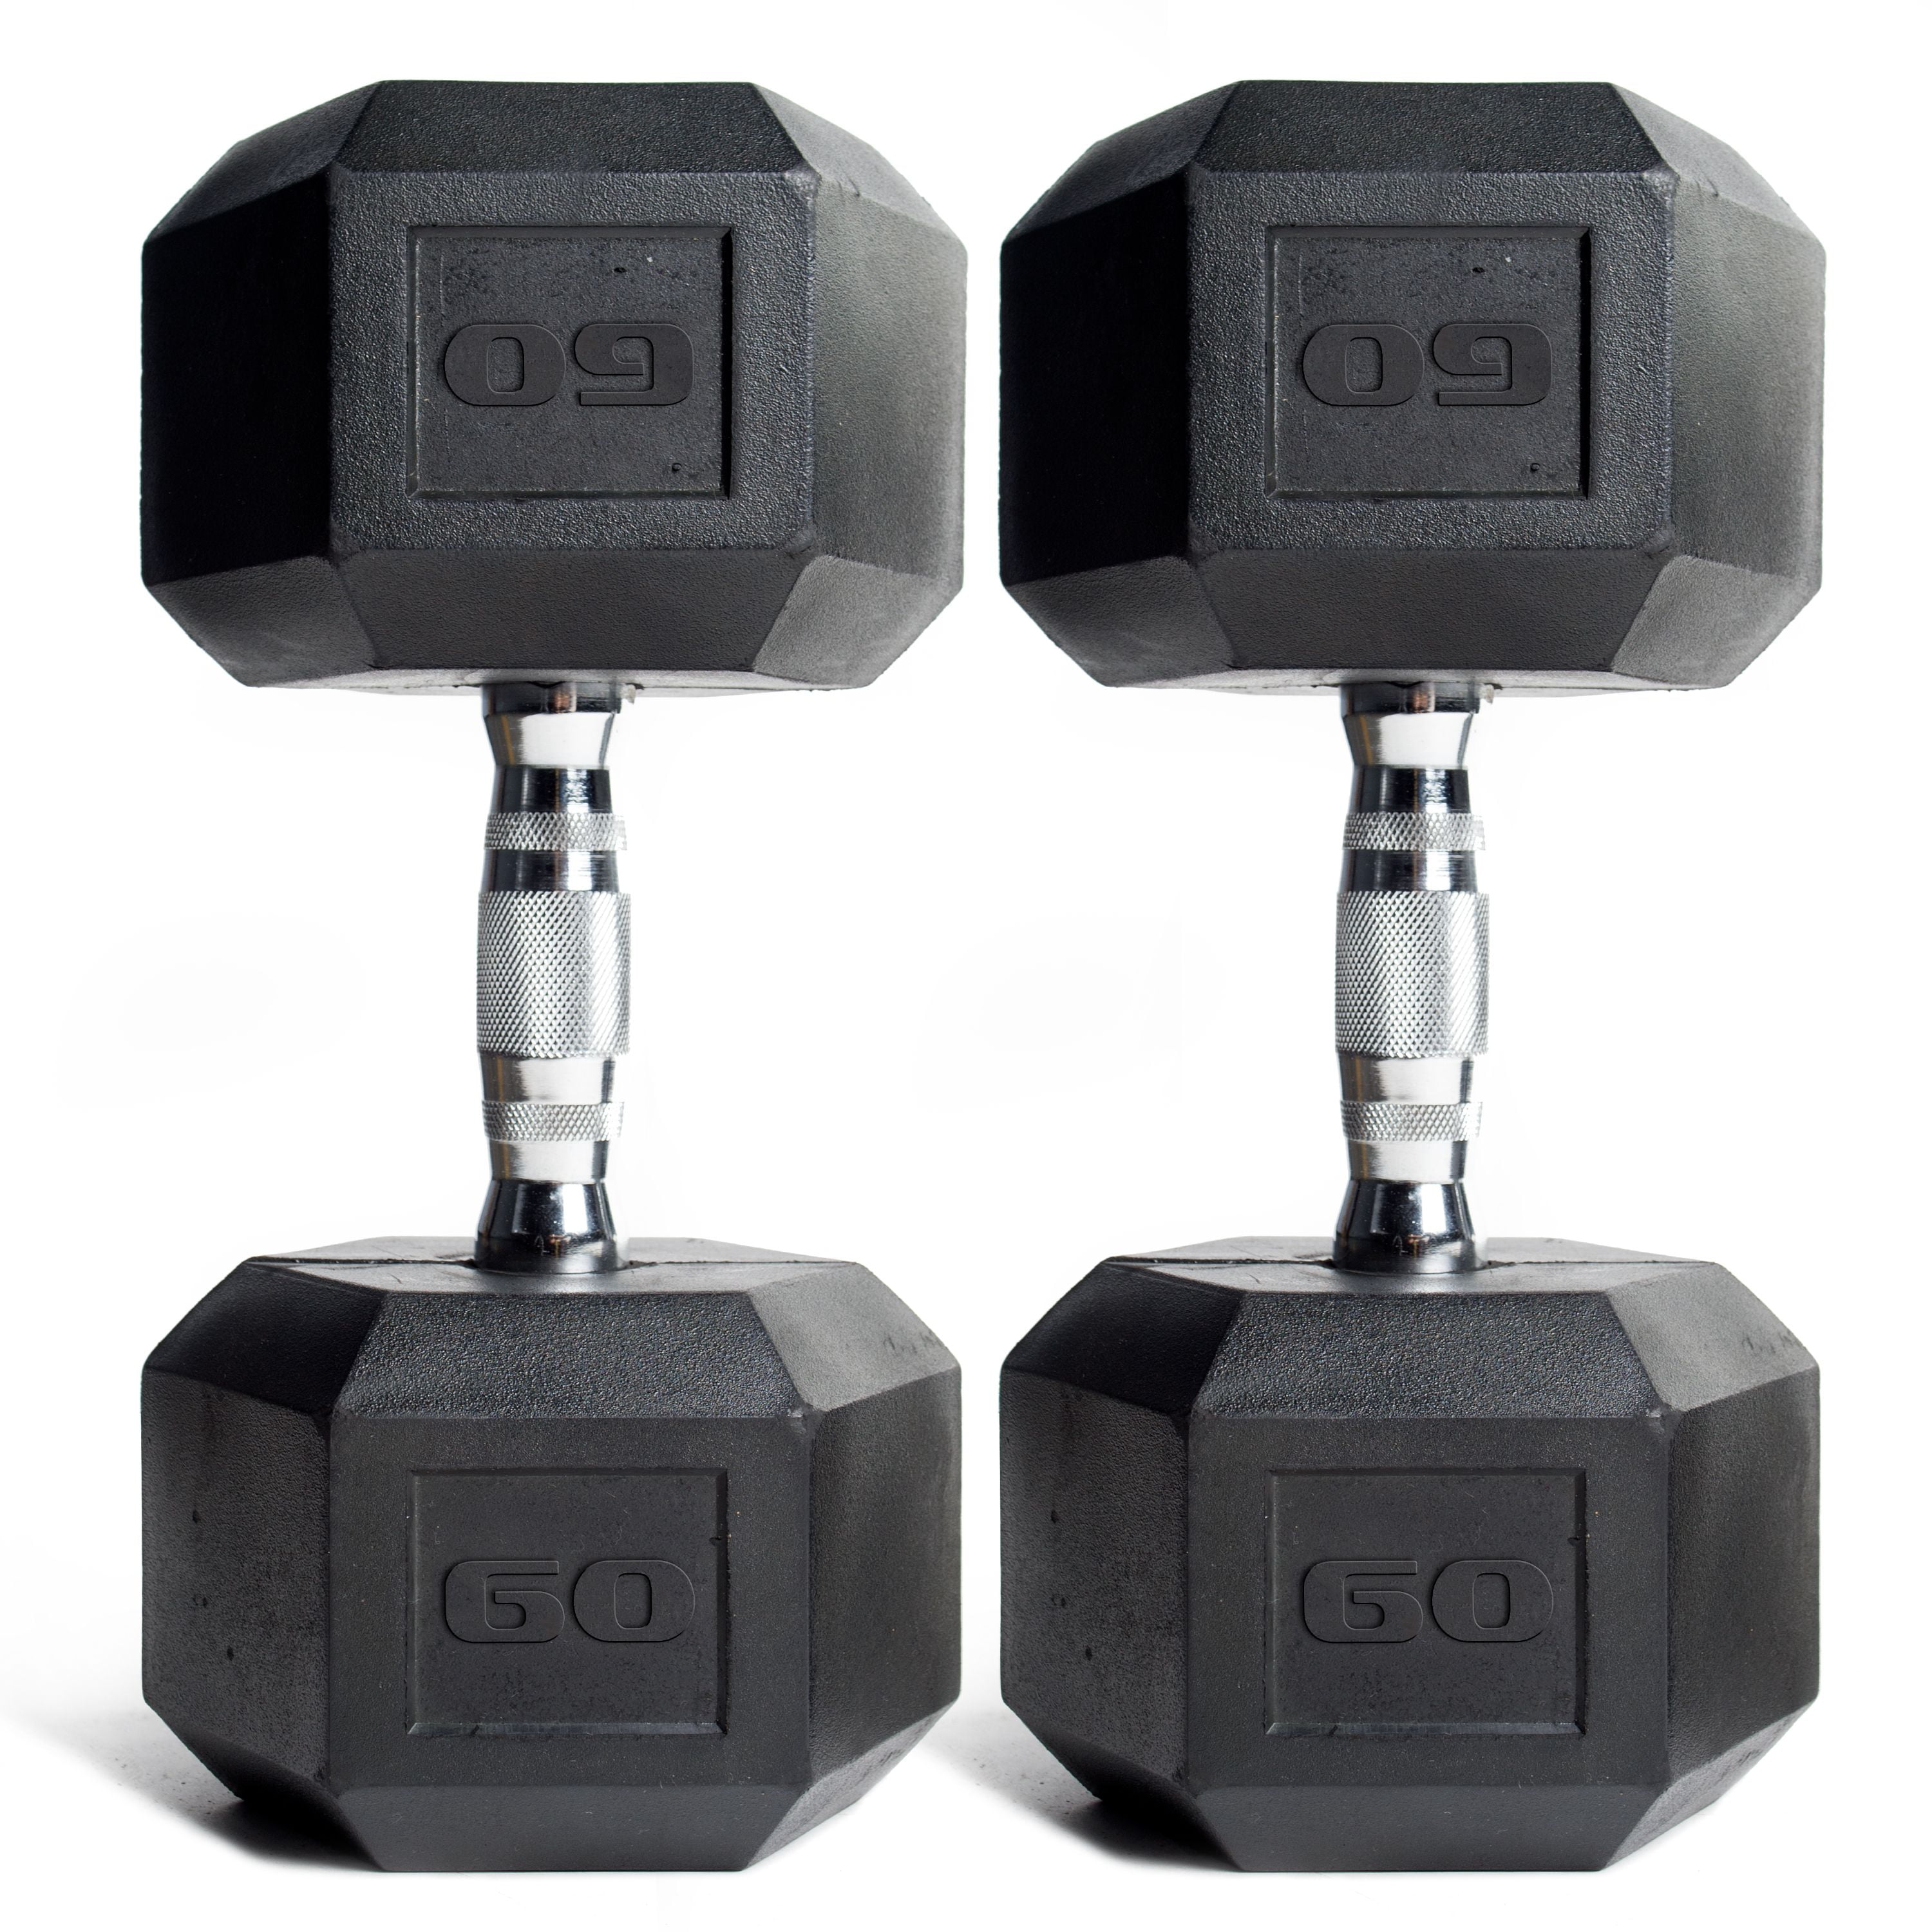 Fast Free Shipping Cap 20 LB Rubber Hex Dumbbells Weights Set of 2 